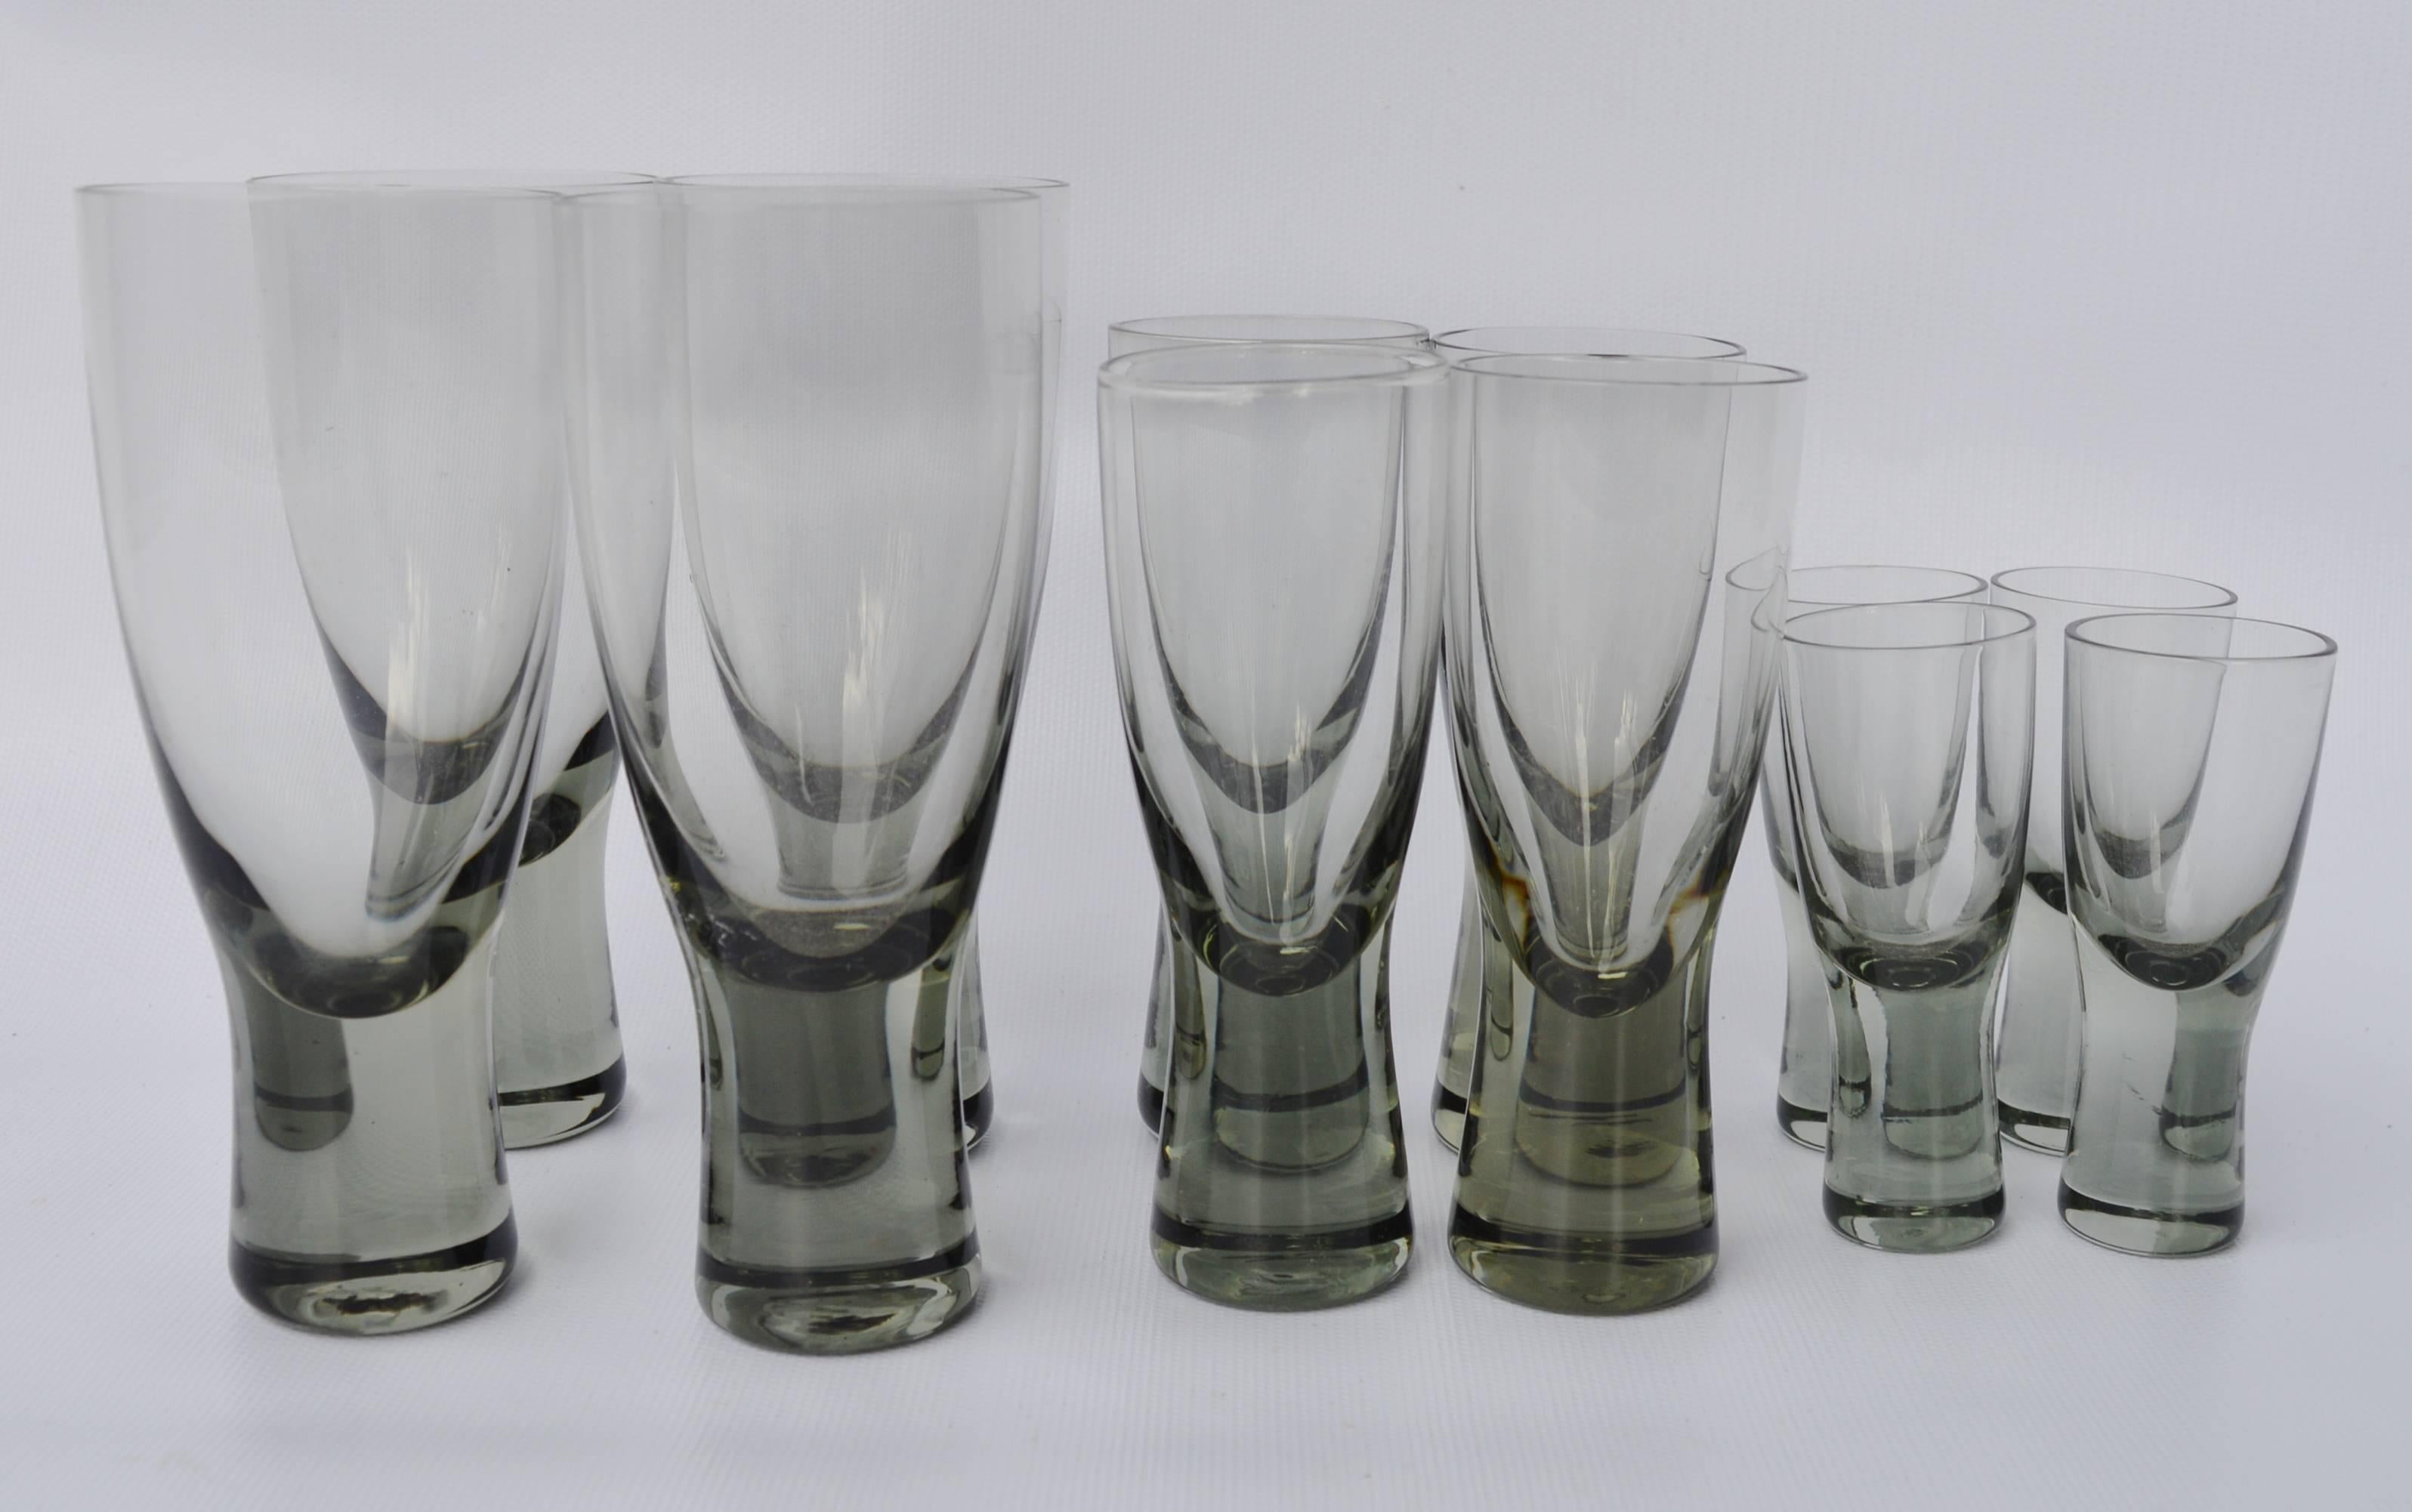 Set 12 Per Lutkin Holmegaard Smoked Canada Glasses - Wine, Aperitif, Cordial In Excellent Condition For Sale In New Westminster, British Columbia